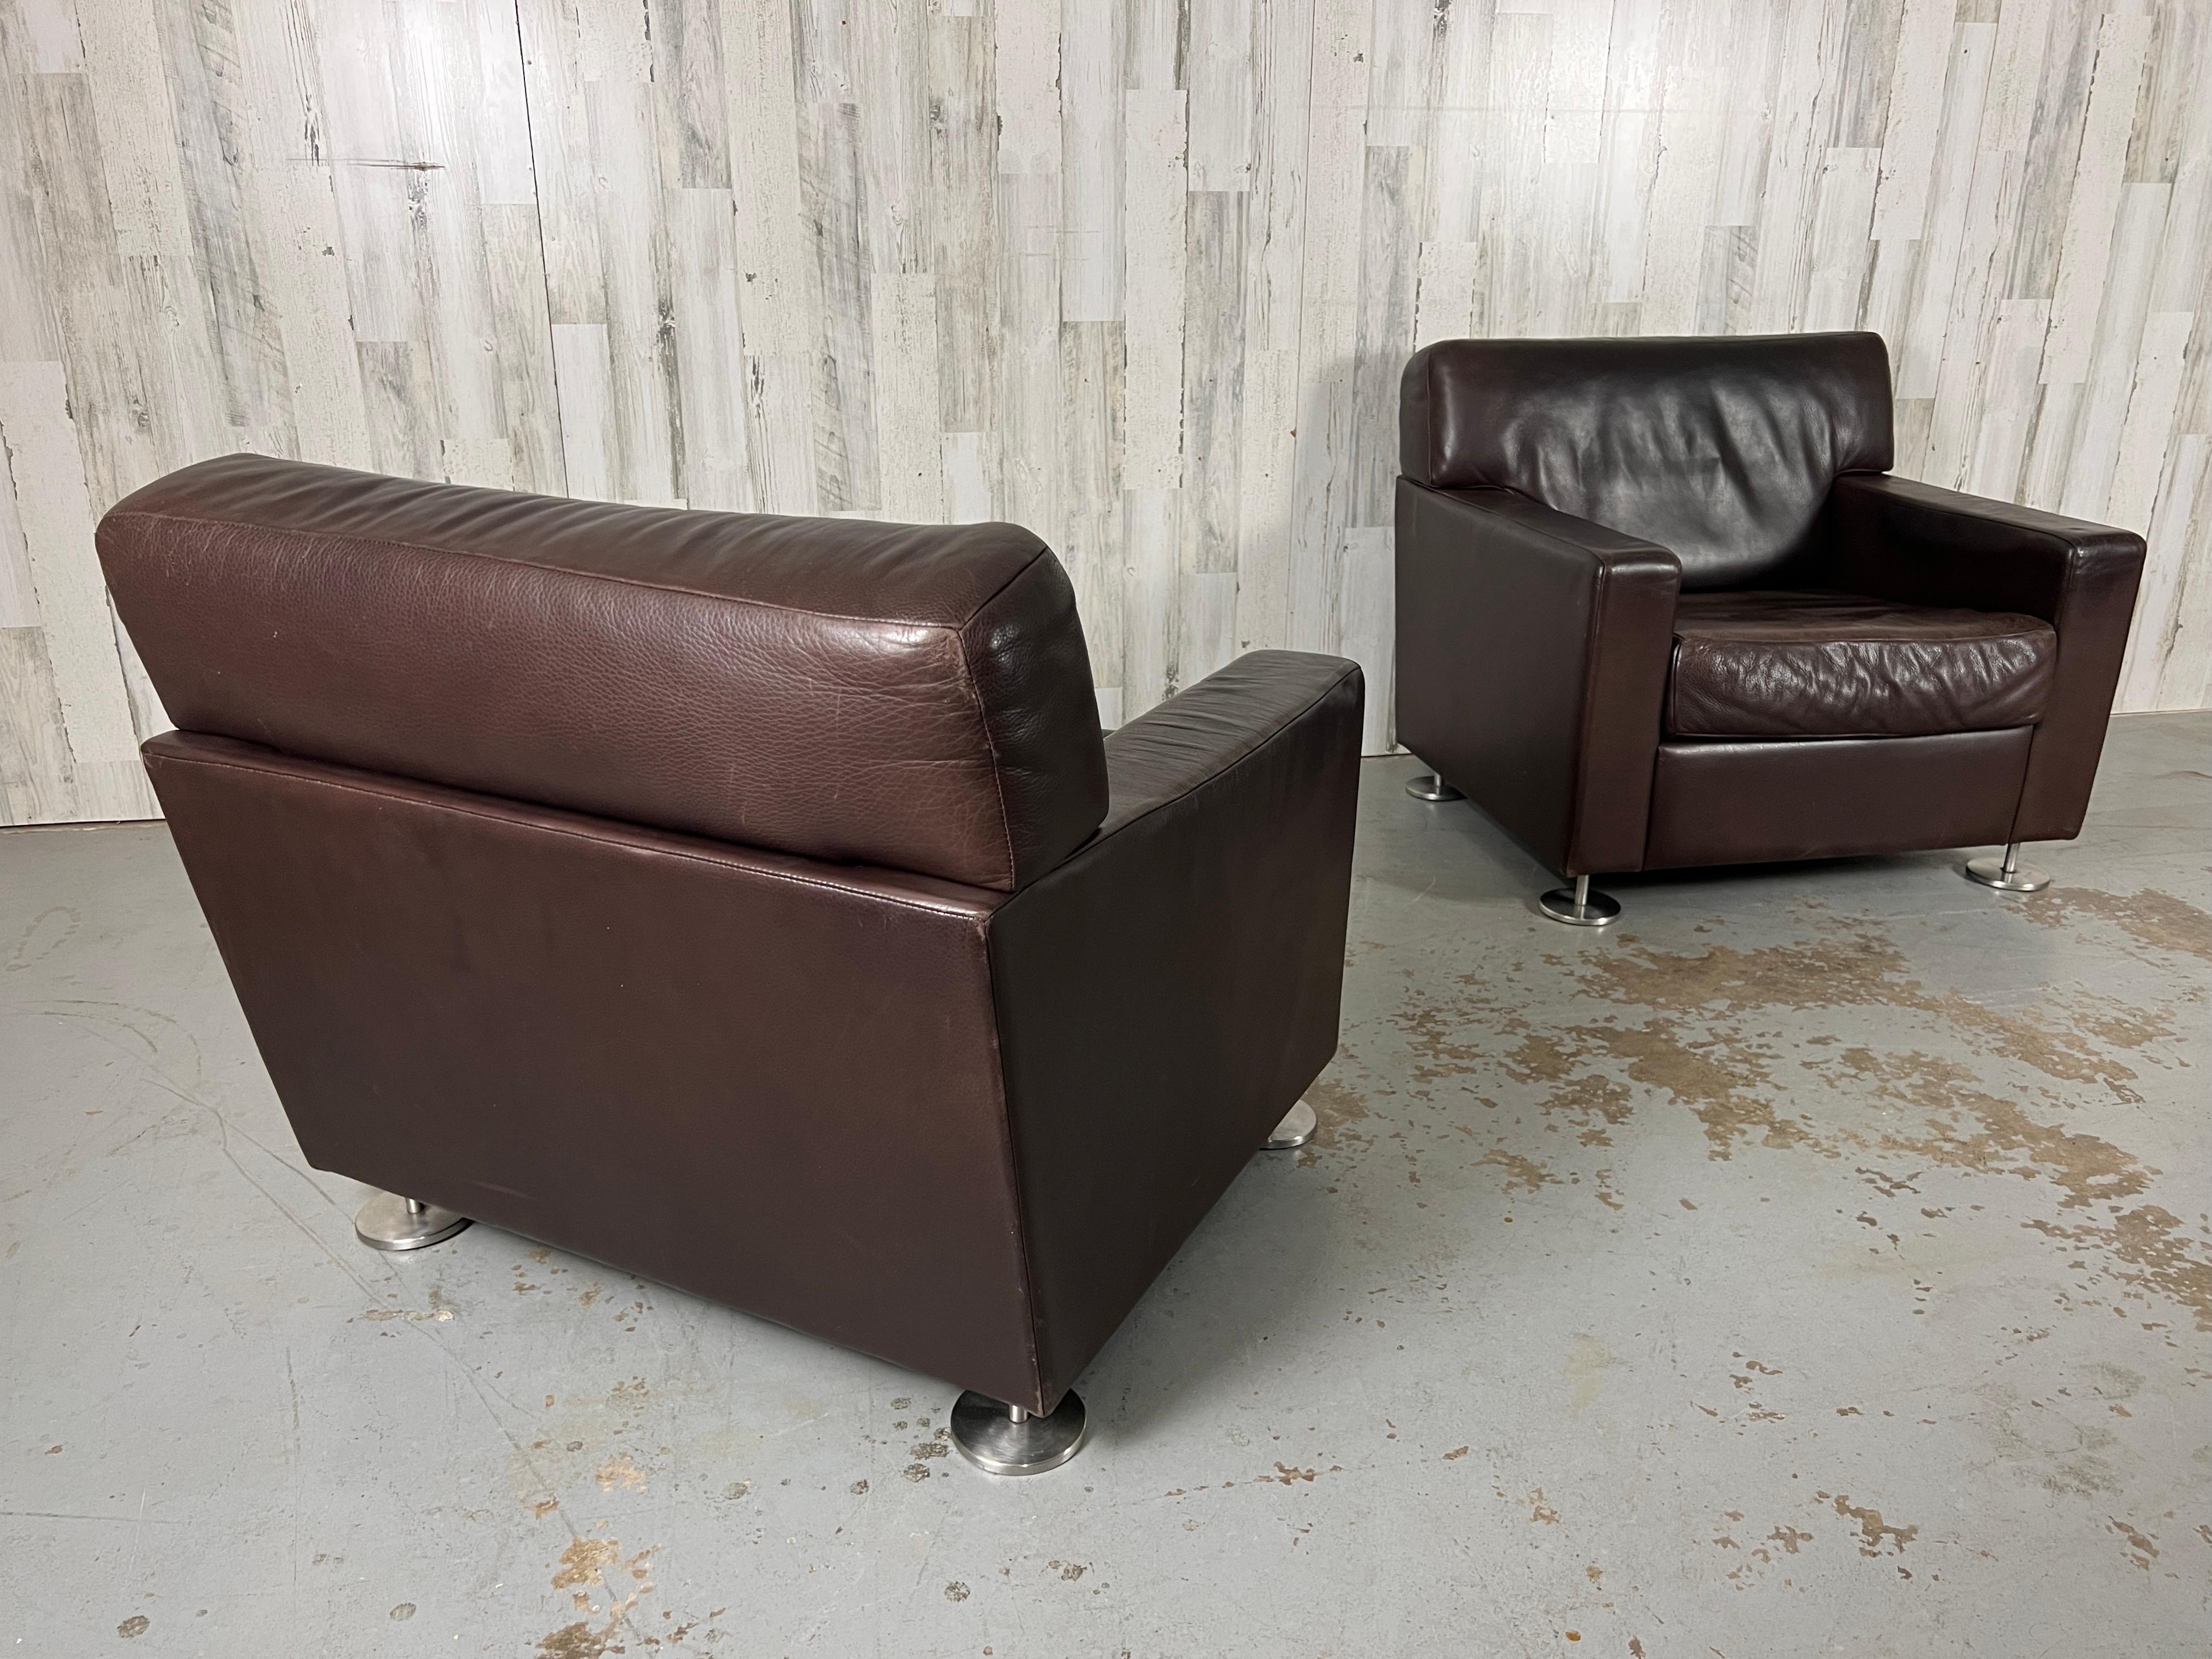 Nice wear and patina on the leather of these Vintage modern lounge chairs with sturdy stainless steel pod legs.